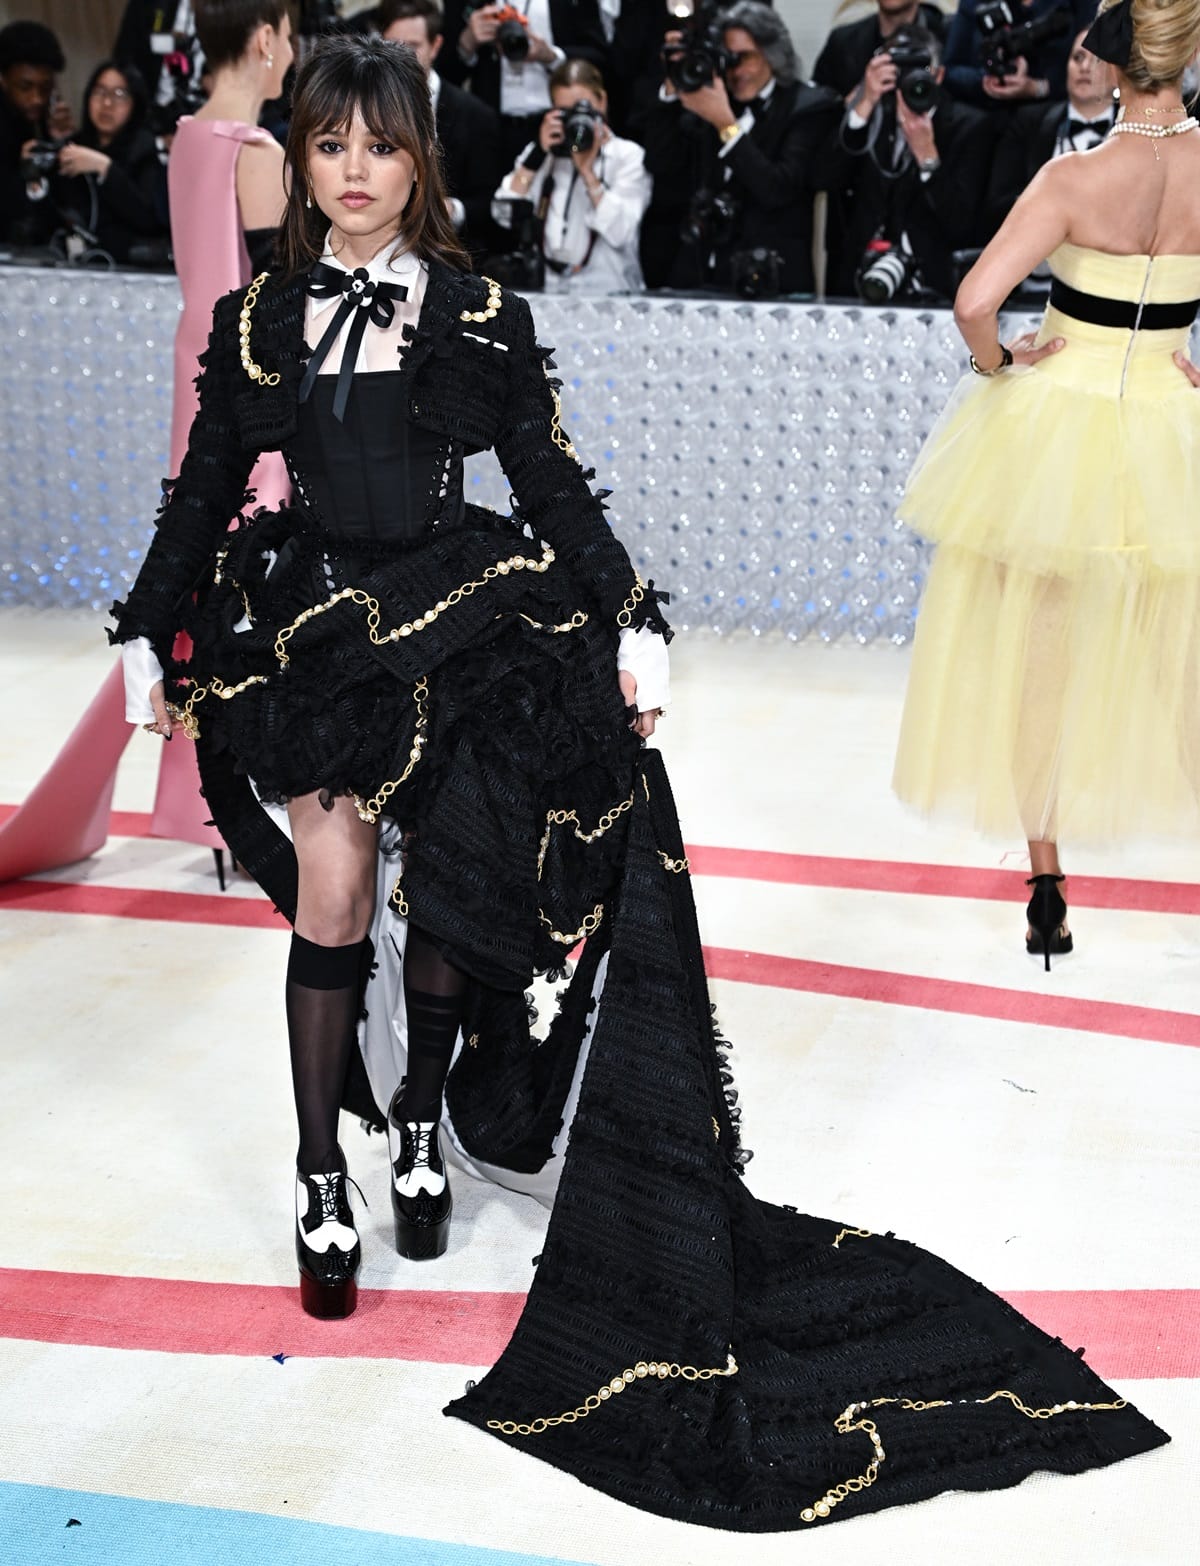 Jenna Ortega made a statement at the 2023 Met Gala by putting a whimsical spin on classic suiting with a nod to Karl Lagerfeld, reminiscent of her character Wednesday Addams from Netflix’s Wednesday